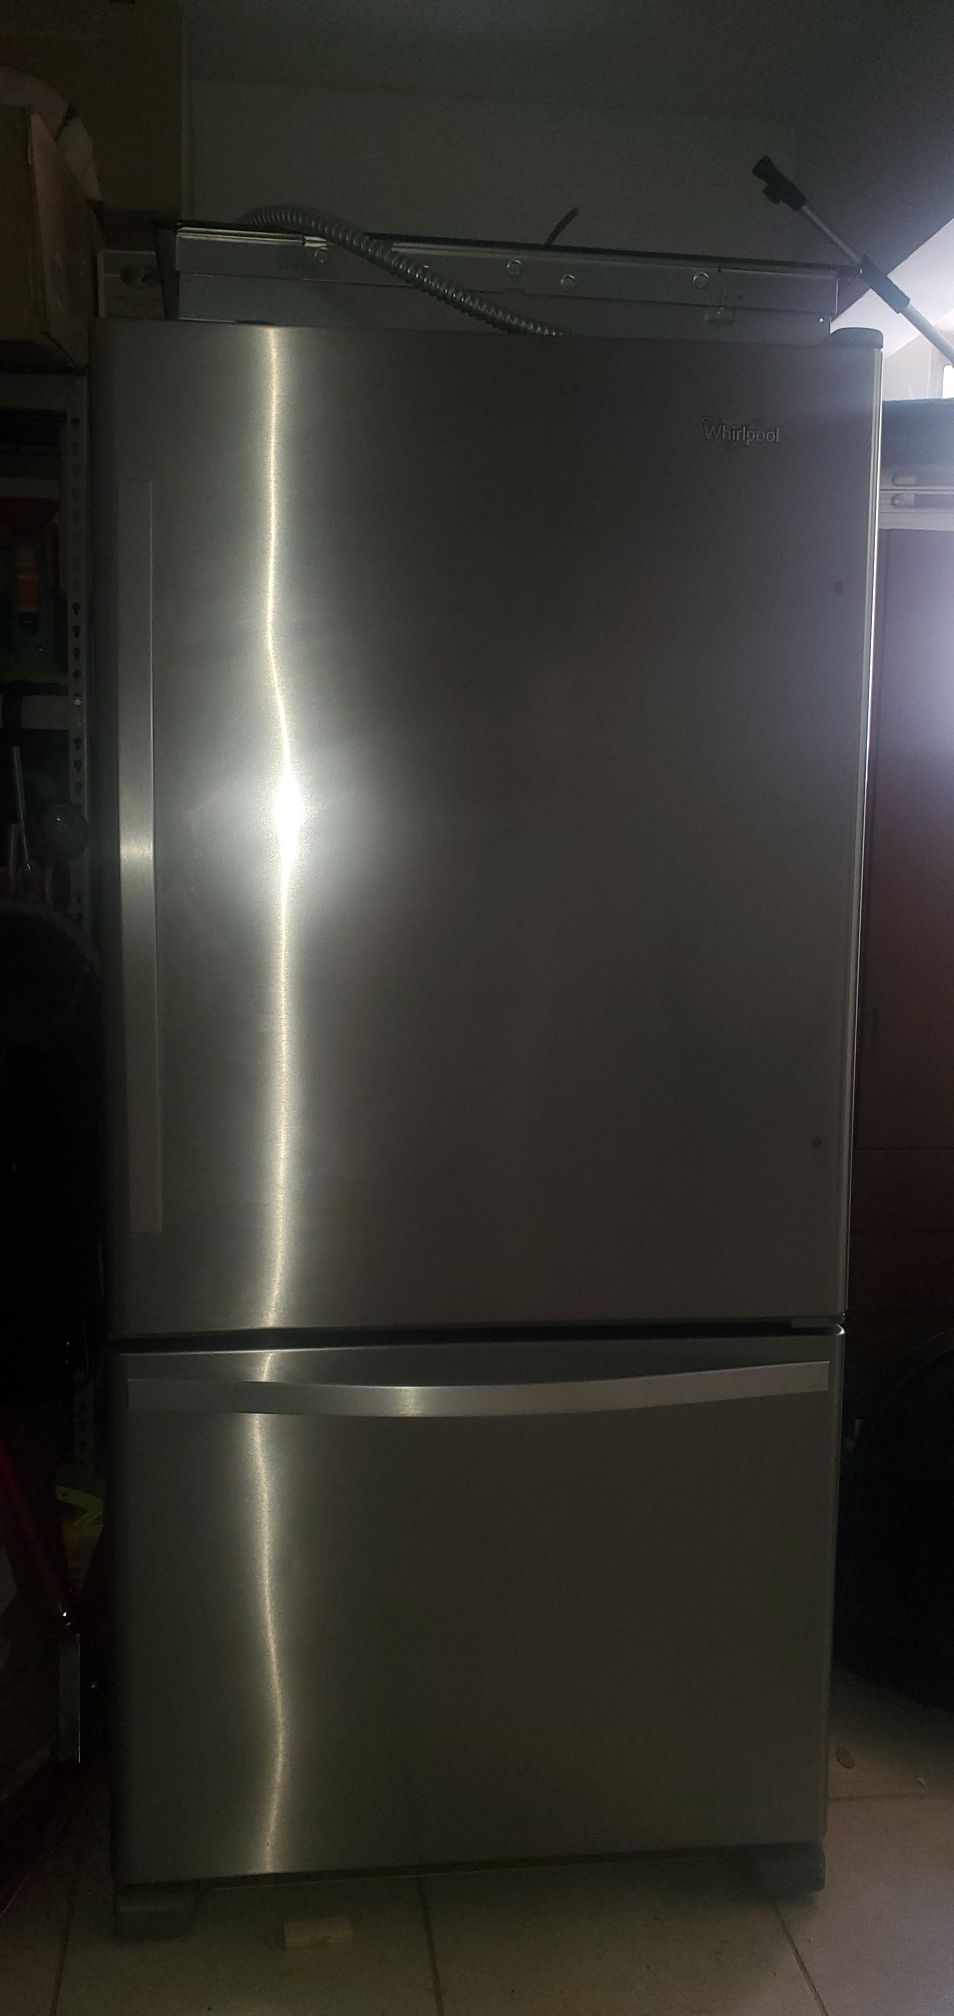 Whirlpool appliances for sale *NEW*